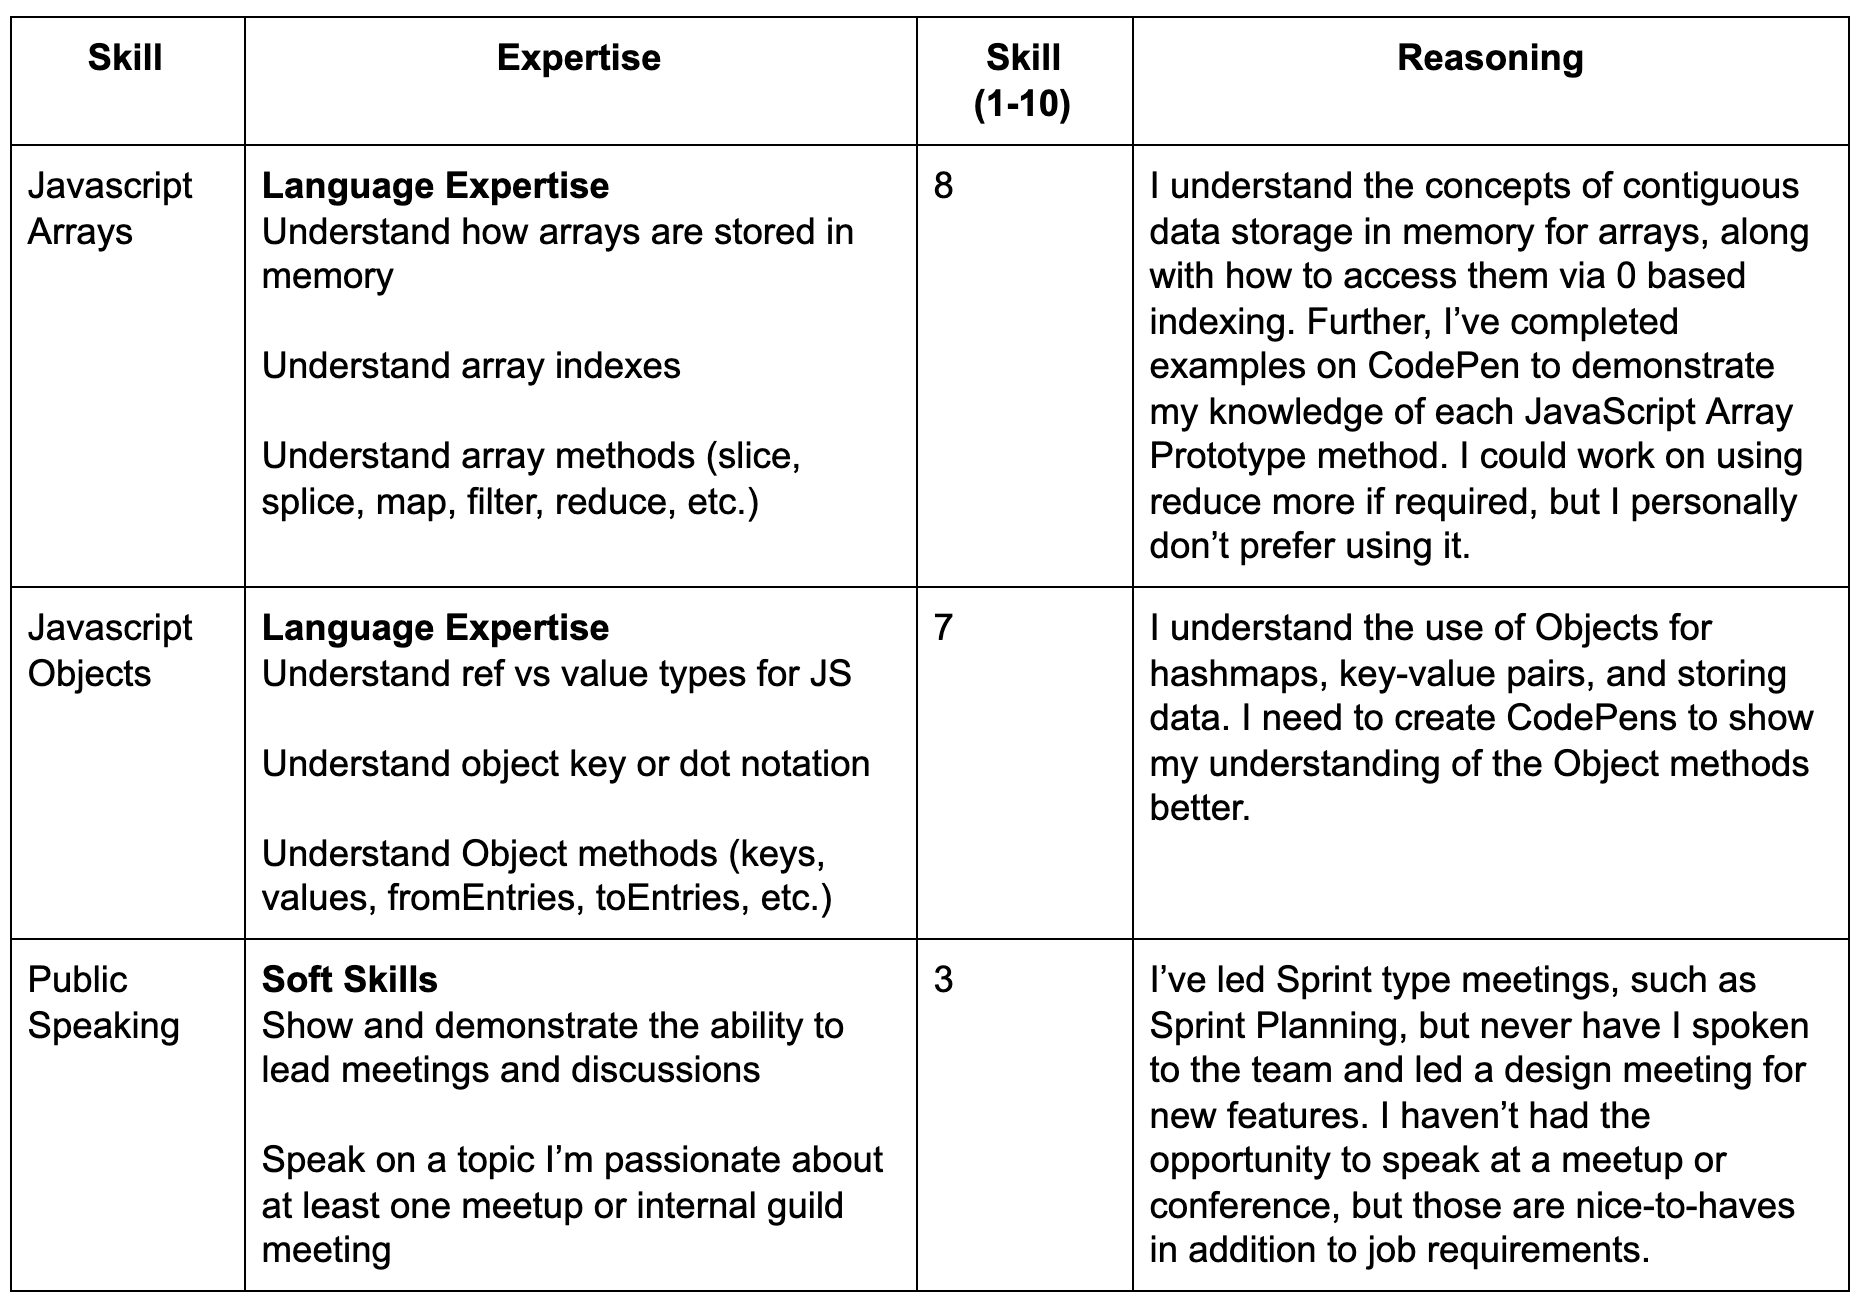 A table of various skills and skill ratings to self evaluate my own skill level.